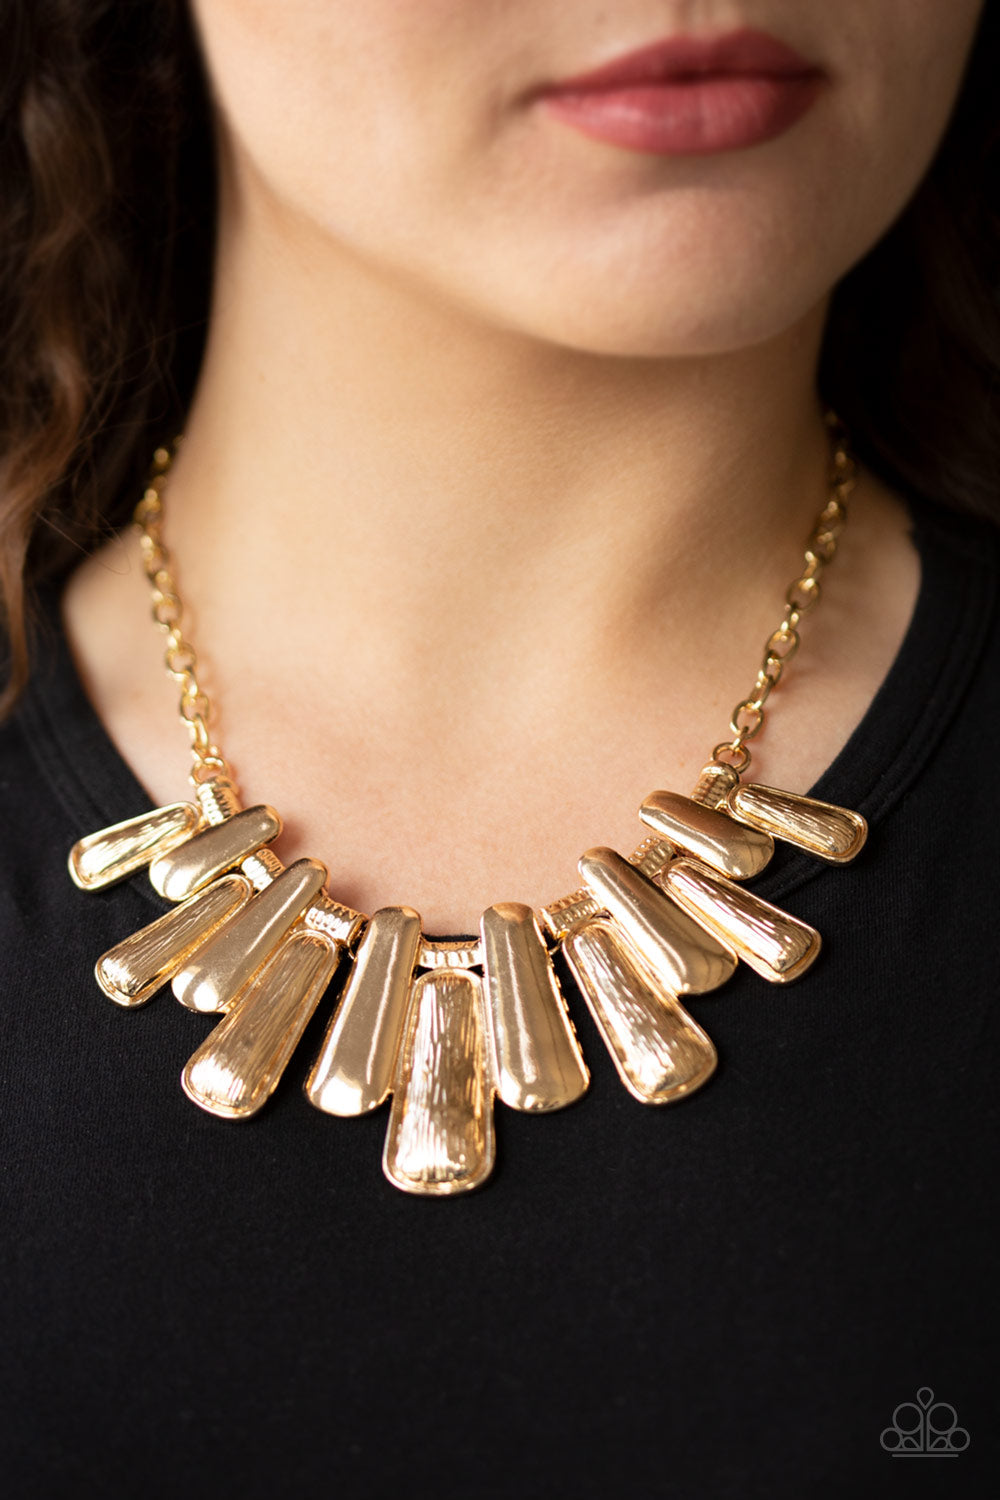 MANE Up - Gold Fashion Necklace - Paparazzi Accessories - Featuring smooth and etched finishes, a collection of glistening gold plates link below the collar, creating a blinding fringe. Features an adjustable clasp closure.